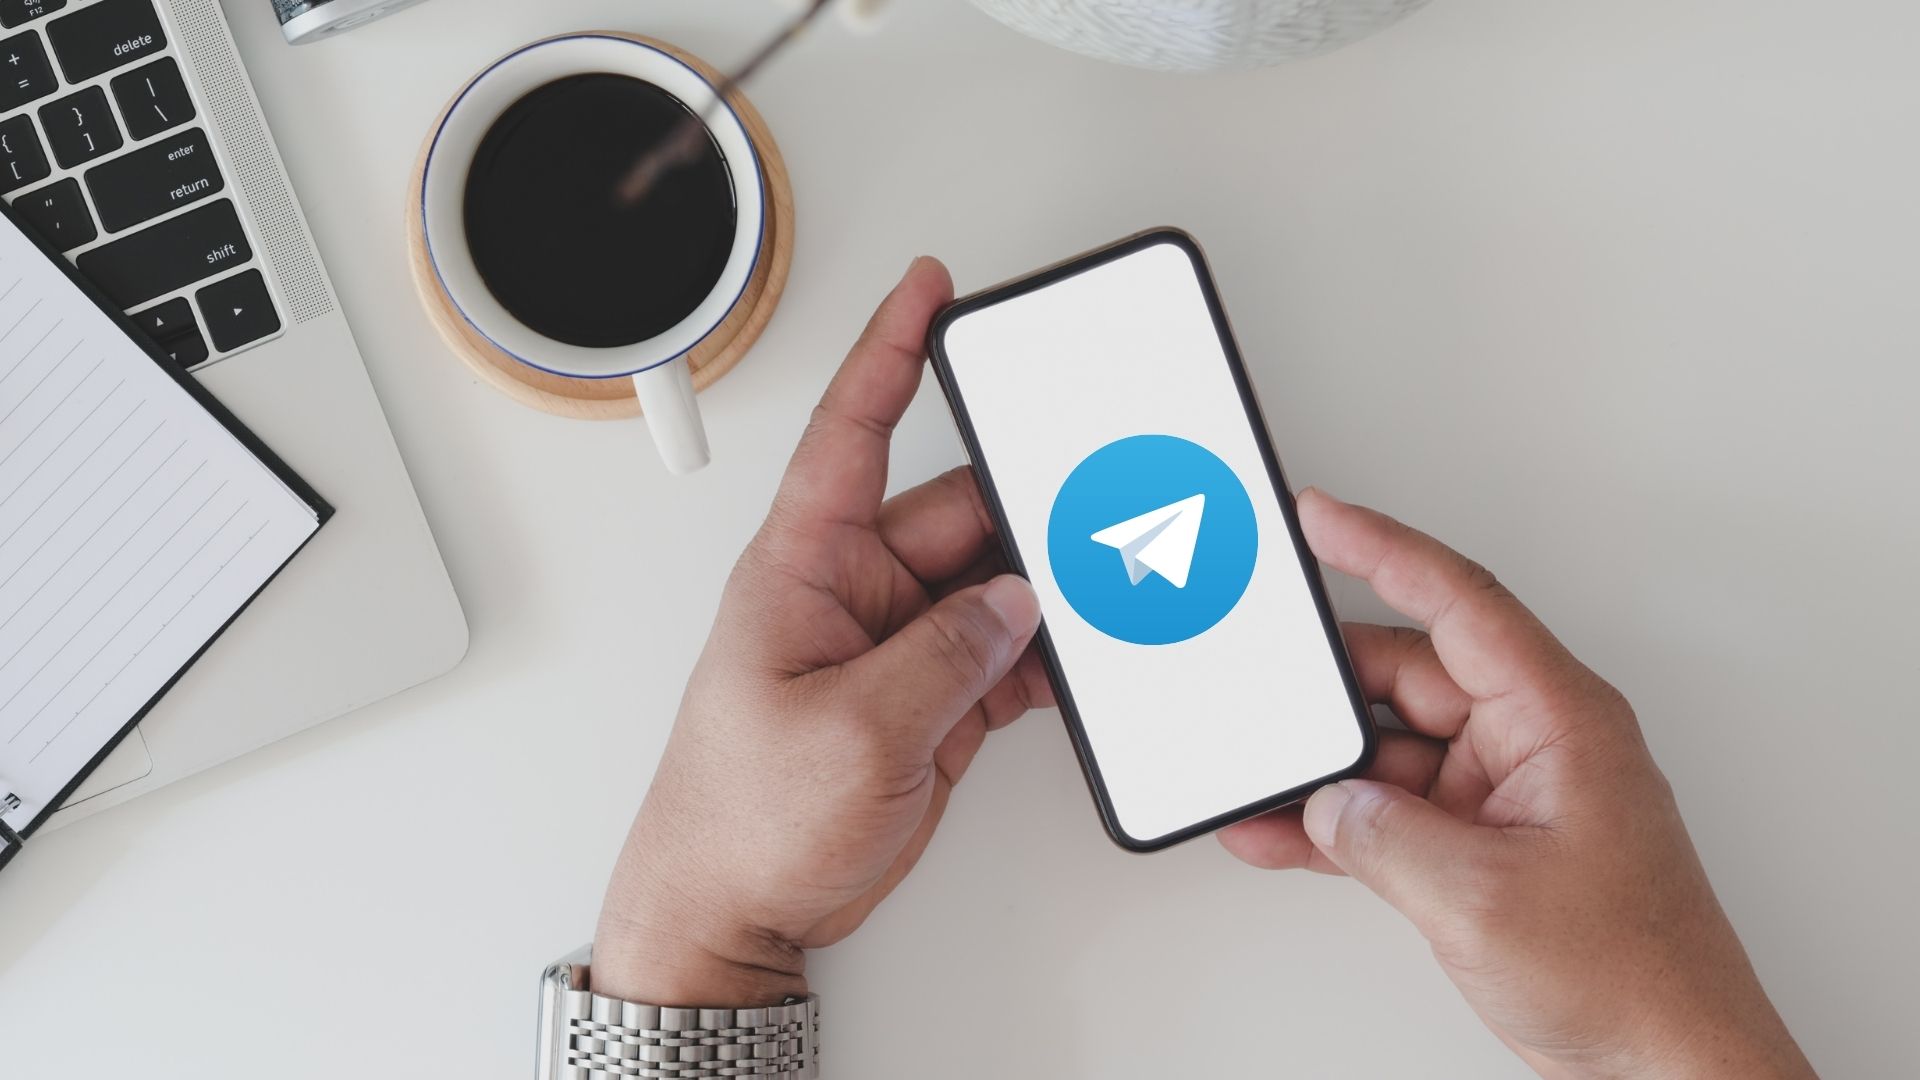 Telegram Now Can Access Your Camera And Microphone 